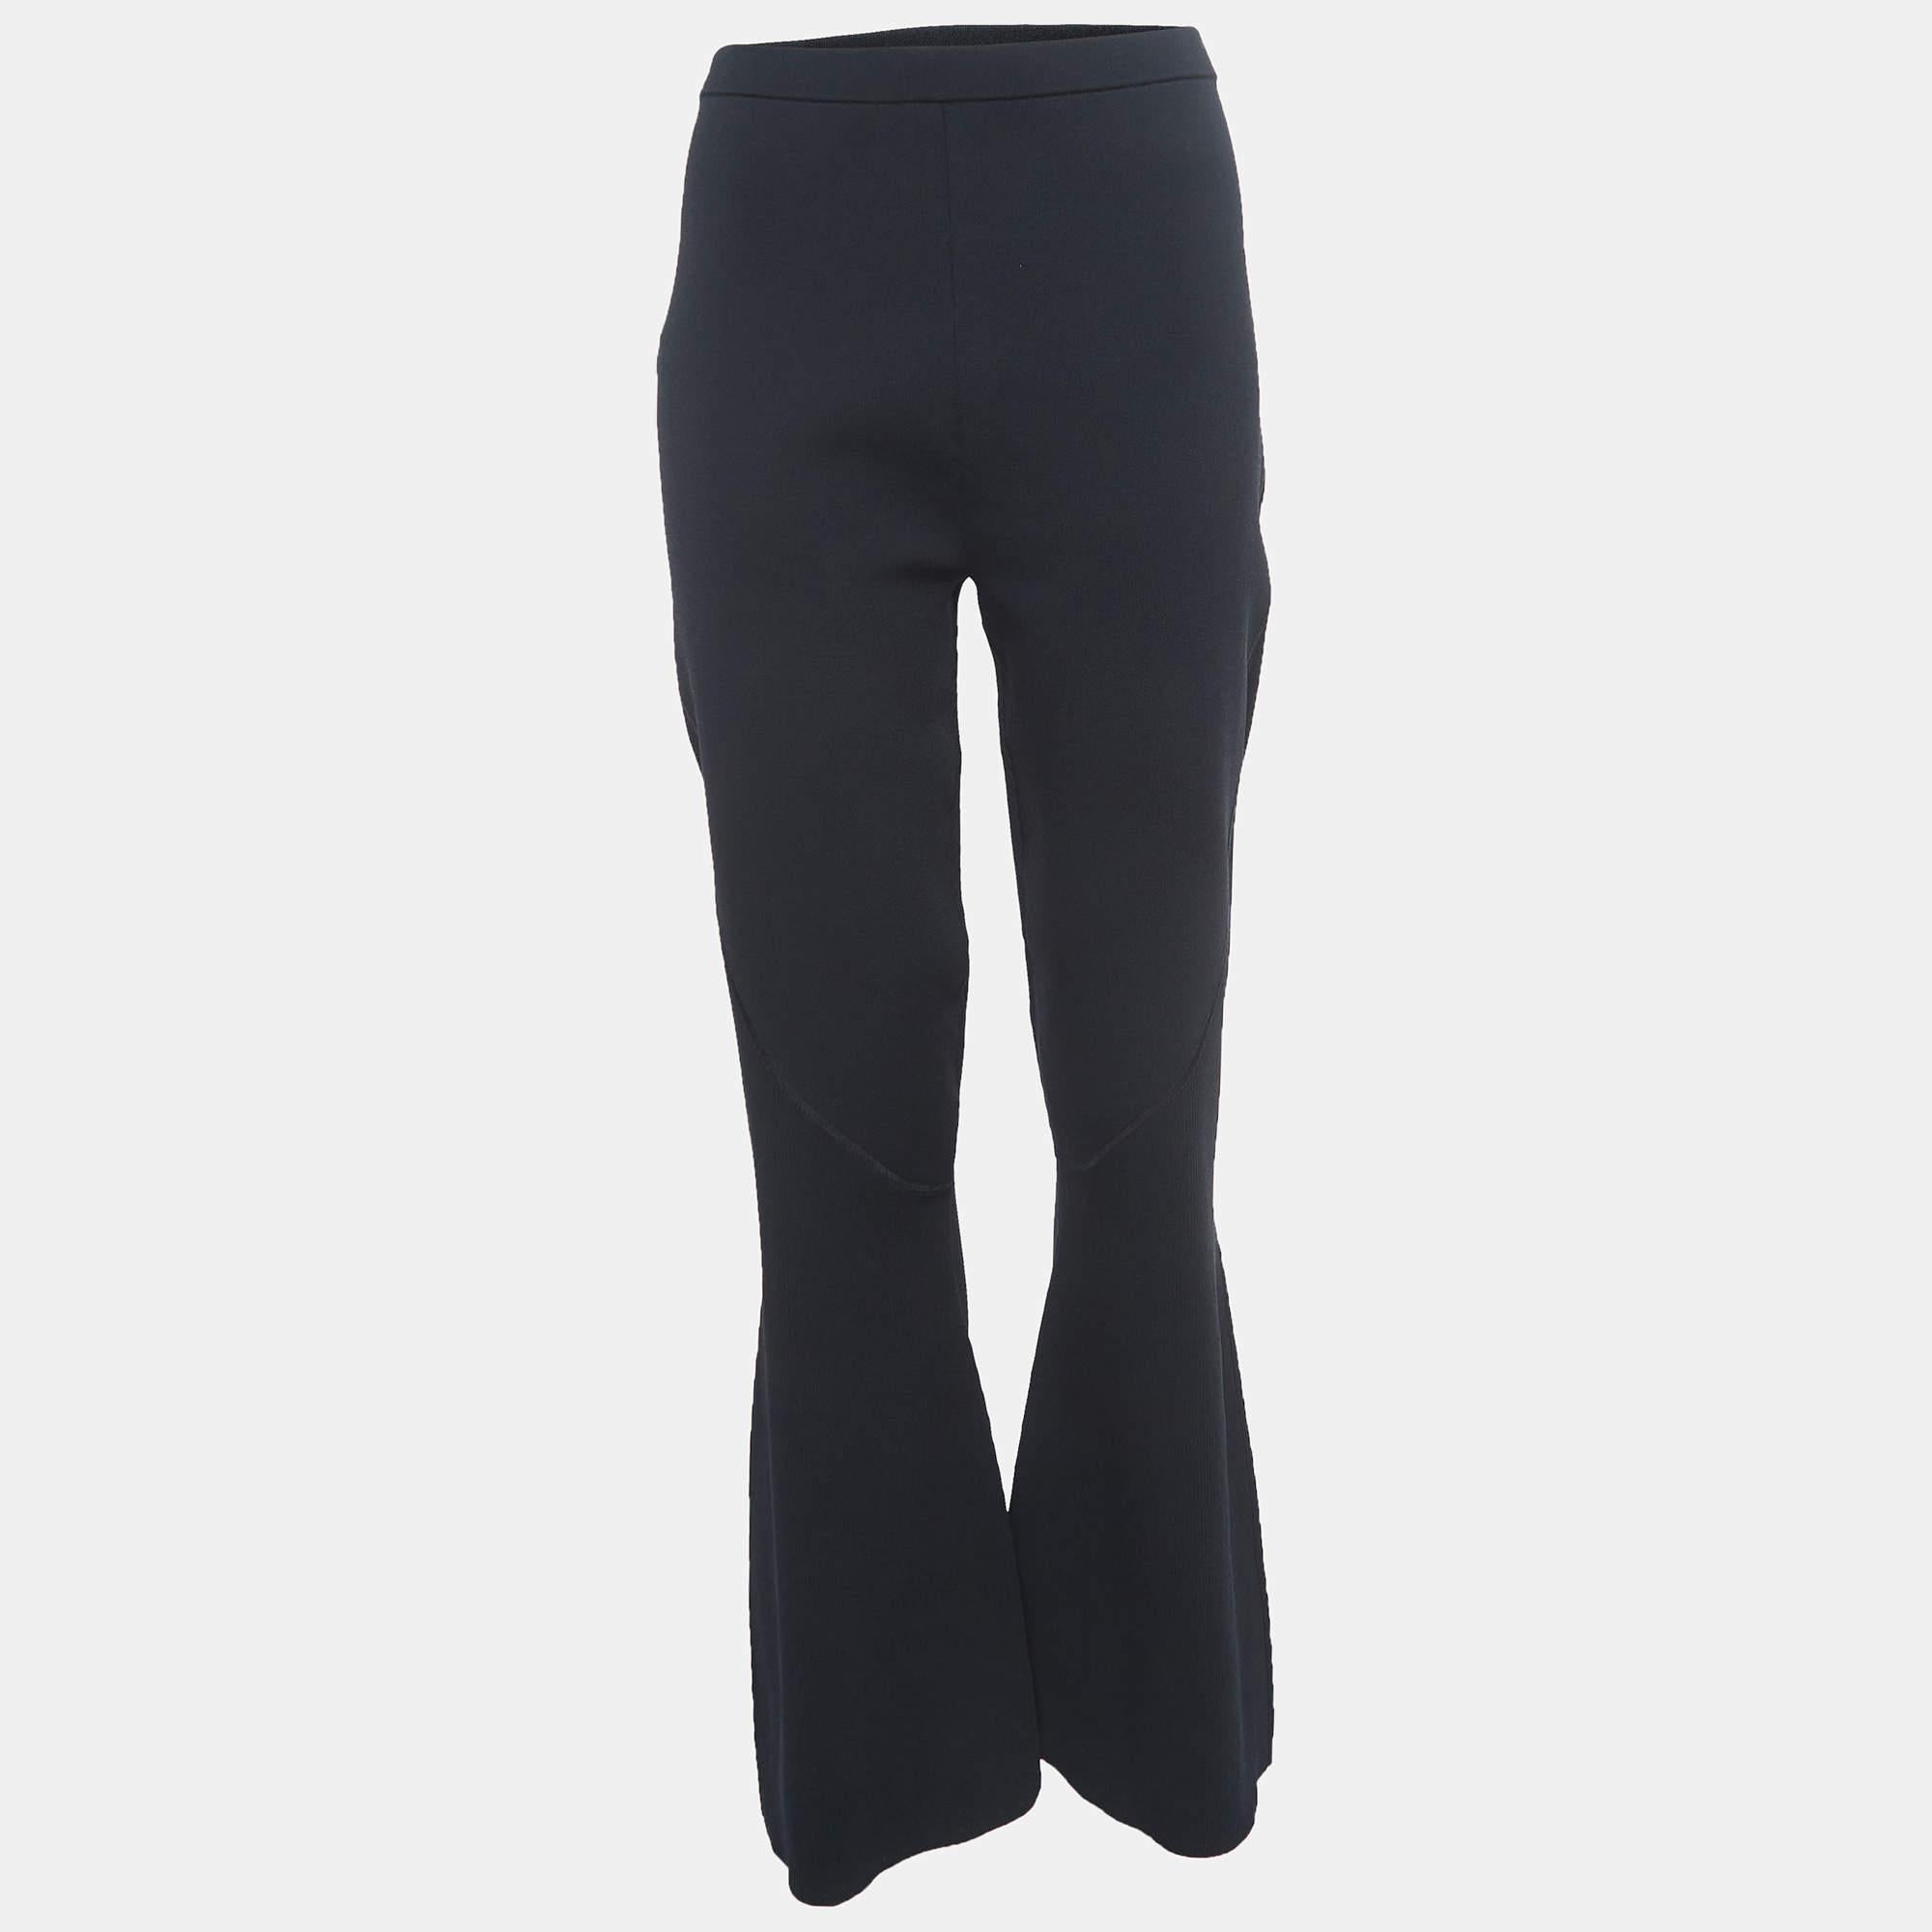 Dion Lee's pants exude modern elegance with a luxurious knit fabric. The wide-leg silhouette offers a sophisticated and comfortable fit, while the black color adds versatility. Perfect for effortlessly transitioning from day to night, these pants